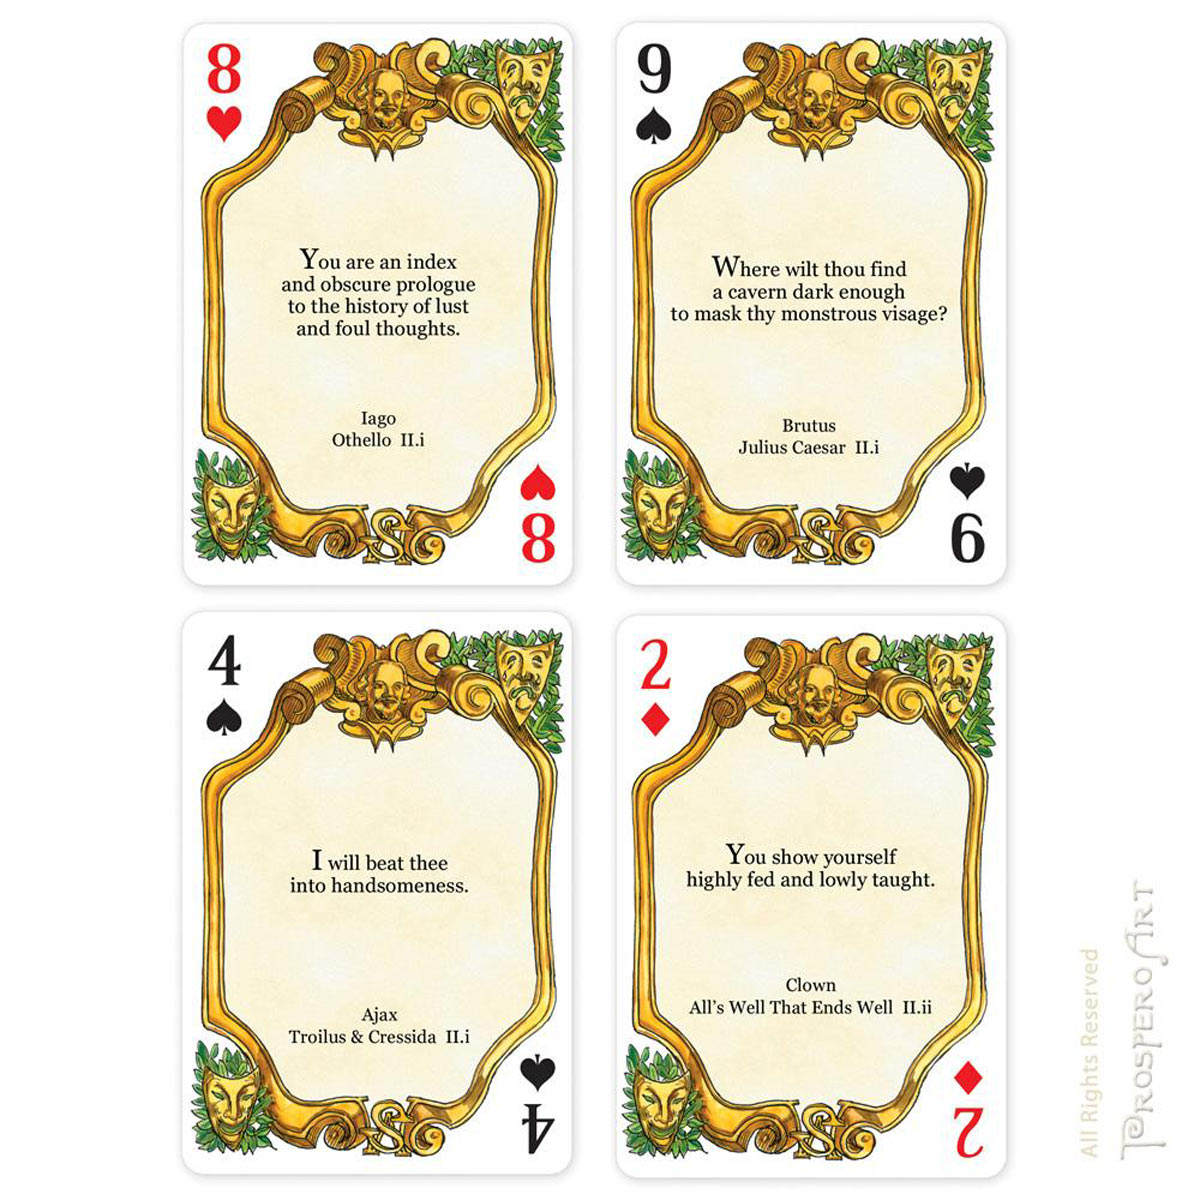 Playing Cards - Shakespeare Insults Luxury Deck